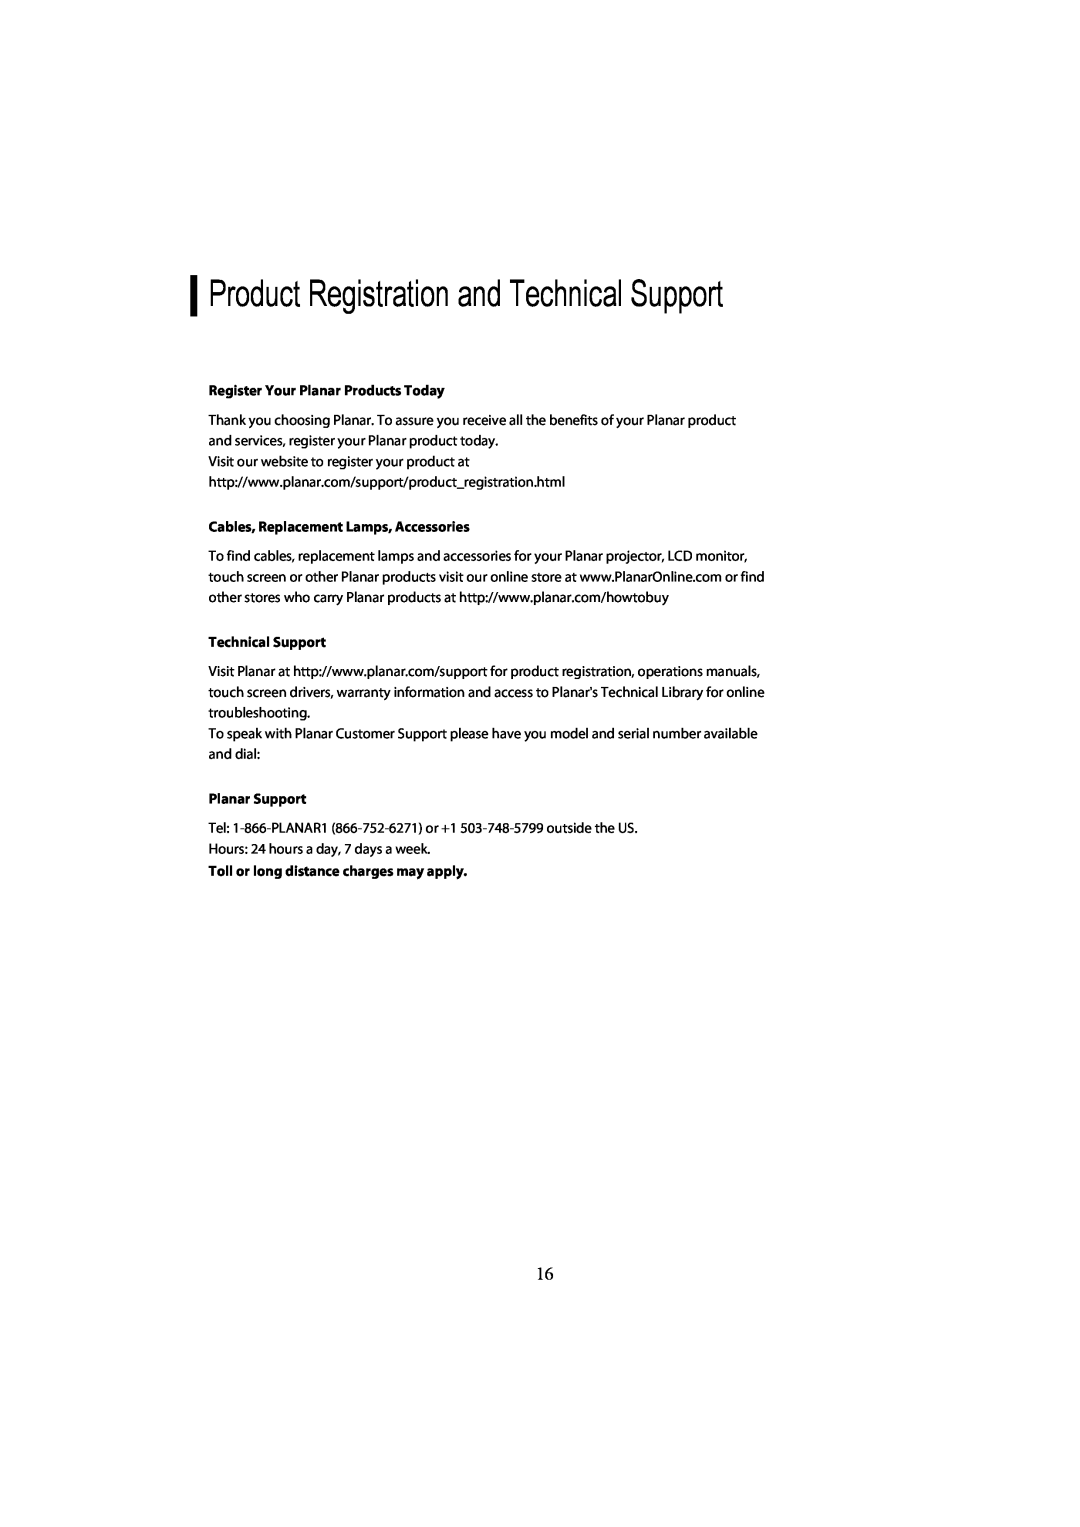 Planar PL1910MW manual Product Registration and Technical Support, Register Your Planar Products Today, Planar Support 